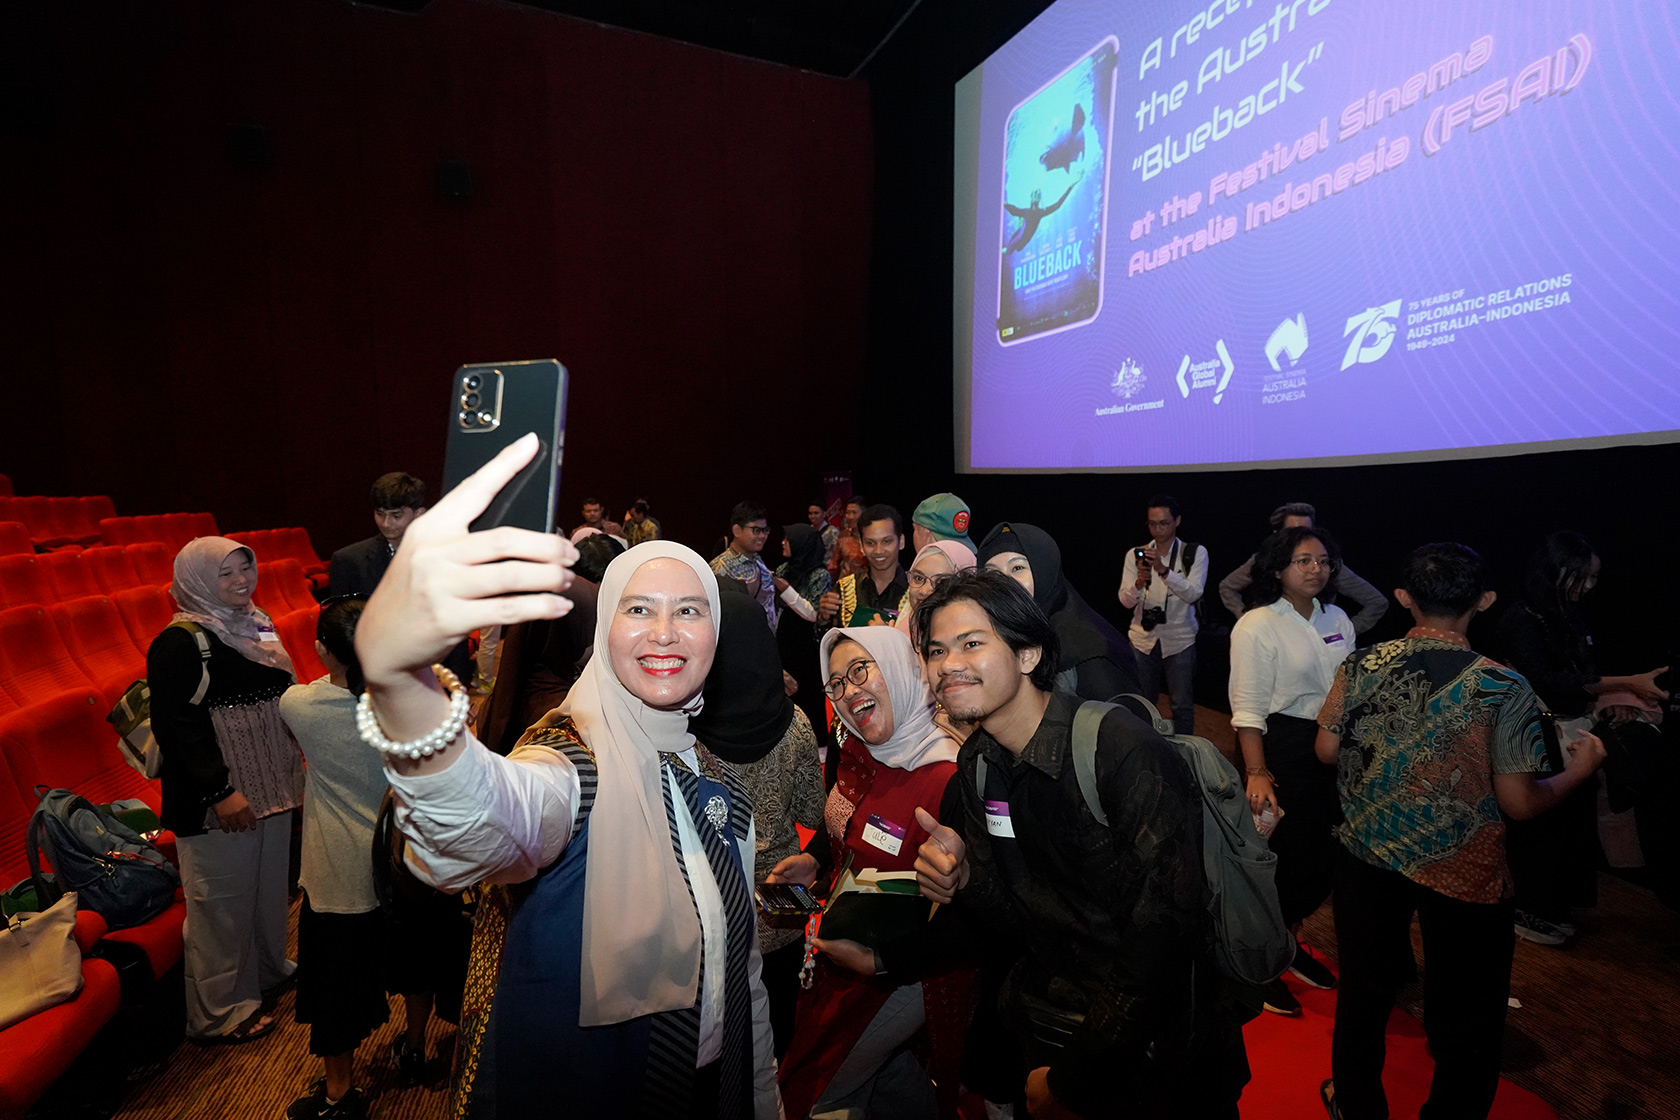 The participants of the ‘Nobar’ with OzAlum in Mataram take a selfie after the film screening.